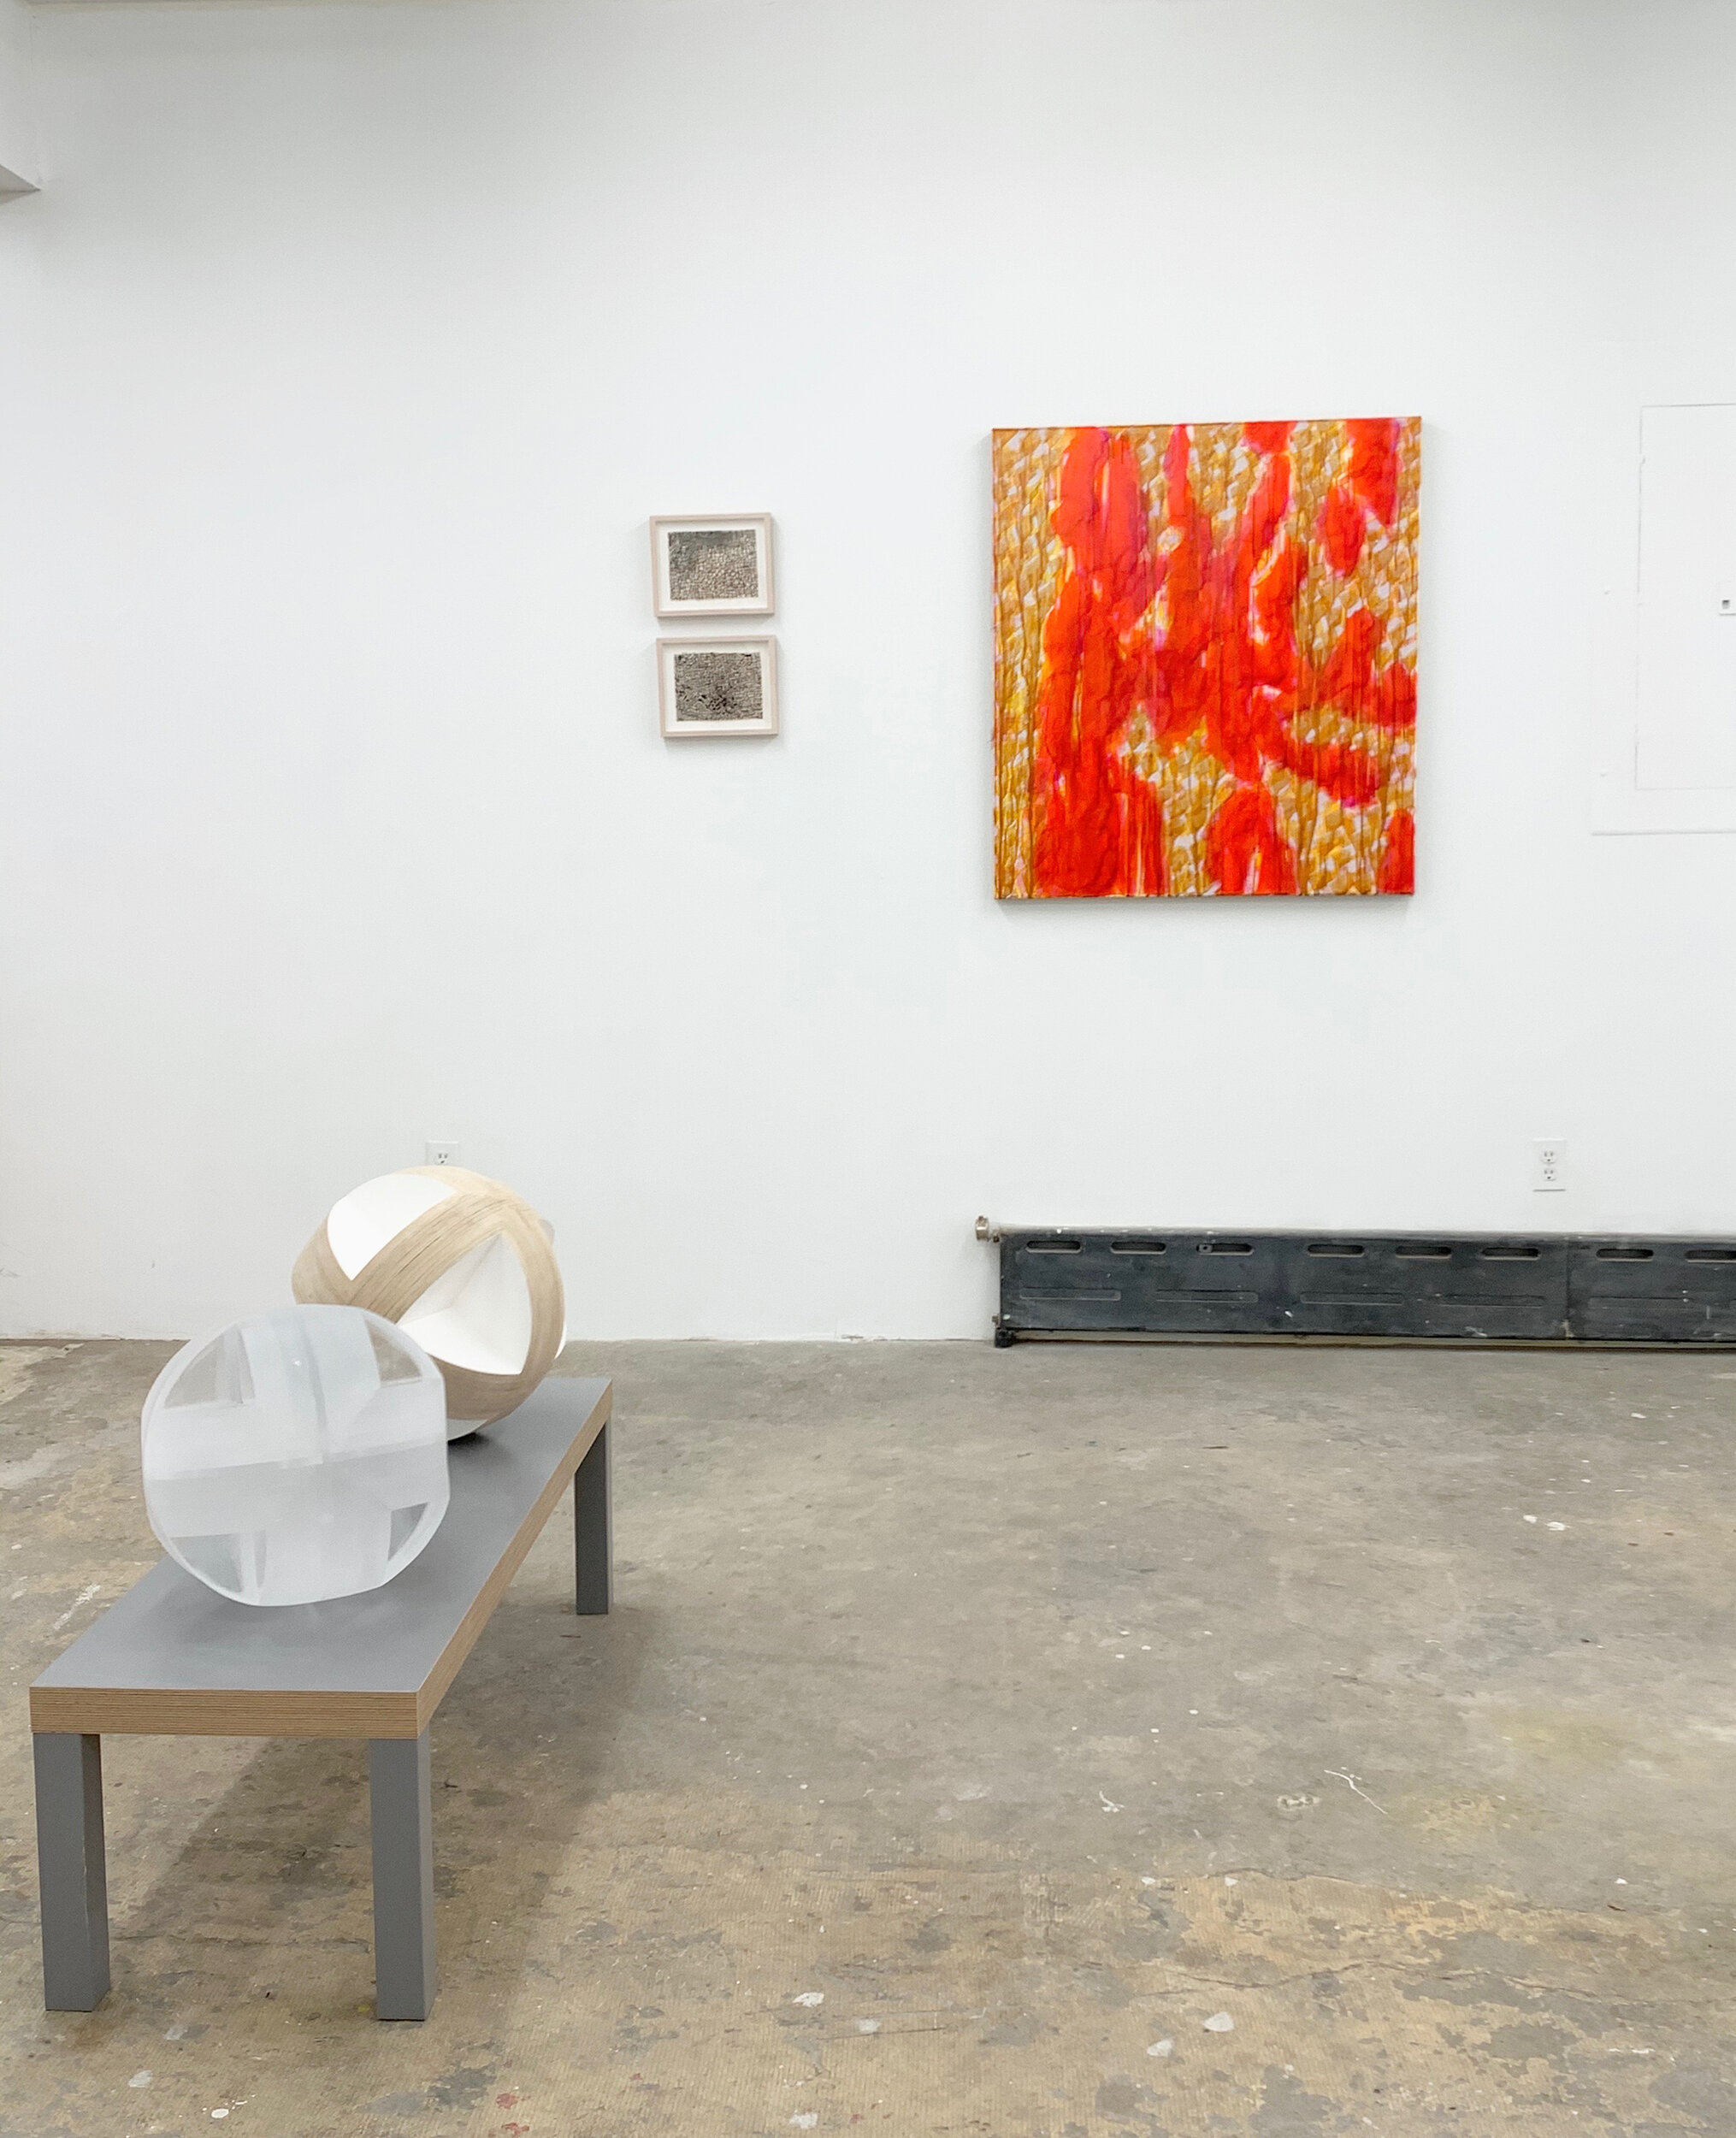 Javier Arce work on paper, Charles Dunn sculpture installation images, None Sing exhibition at Cindy Rucker Gallery